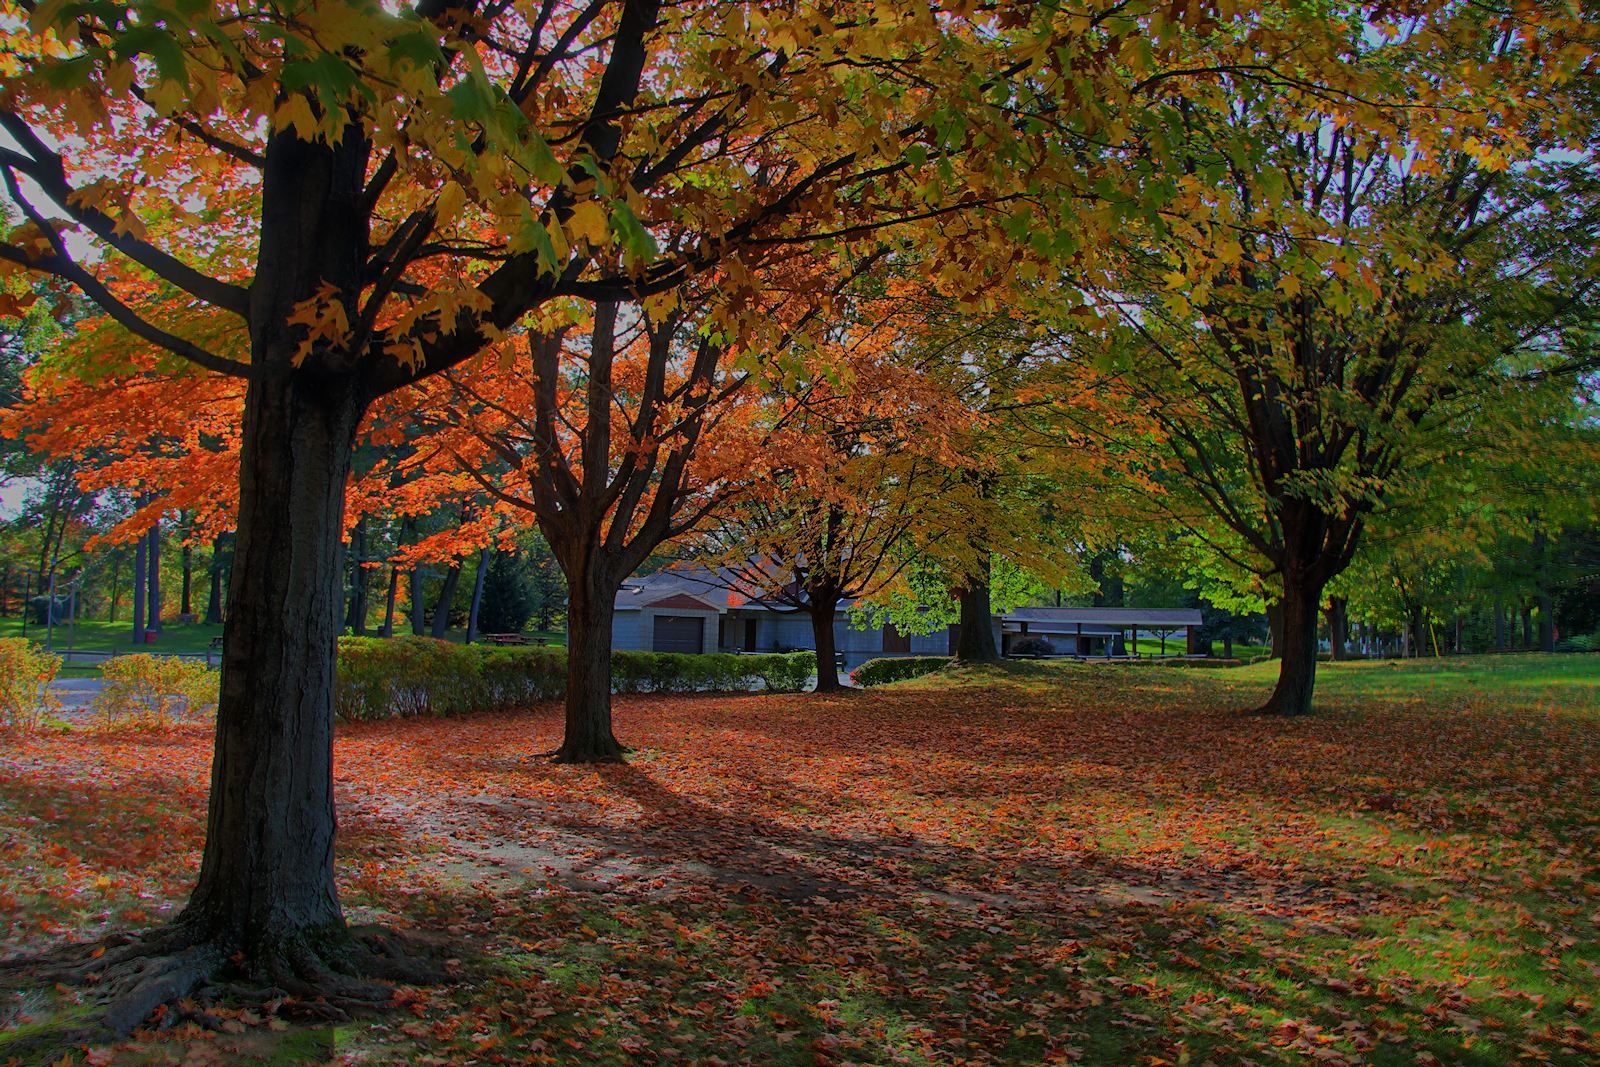 Autumn Scene at Cook Park<BR>October 9, 2013